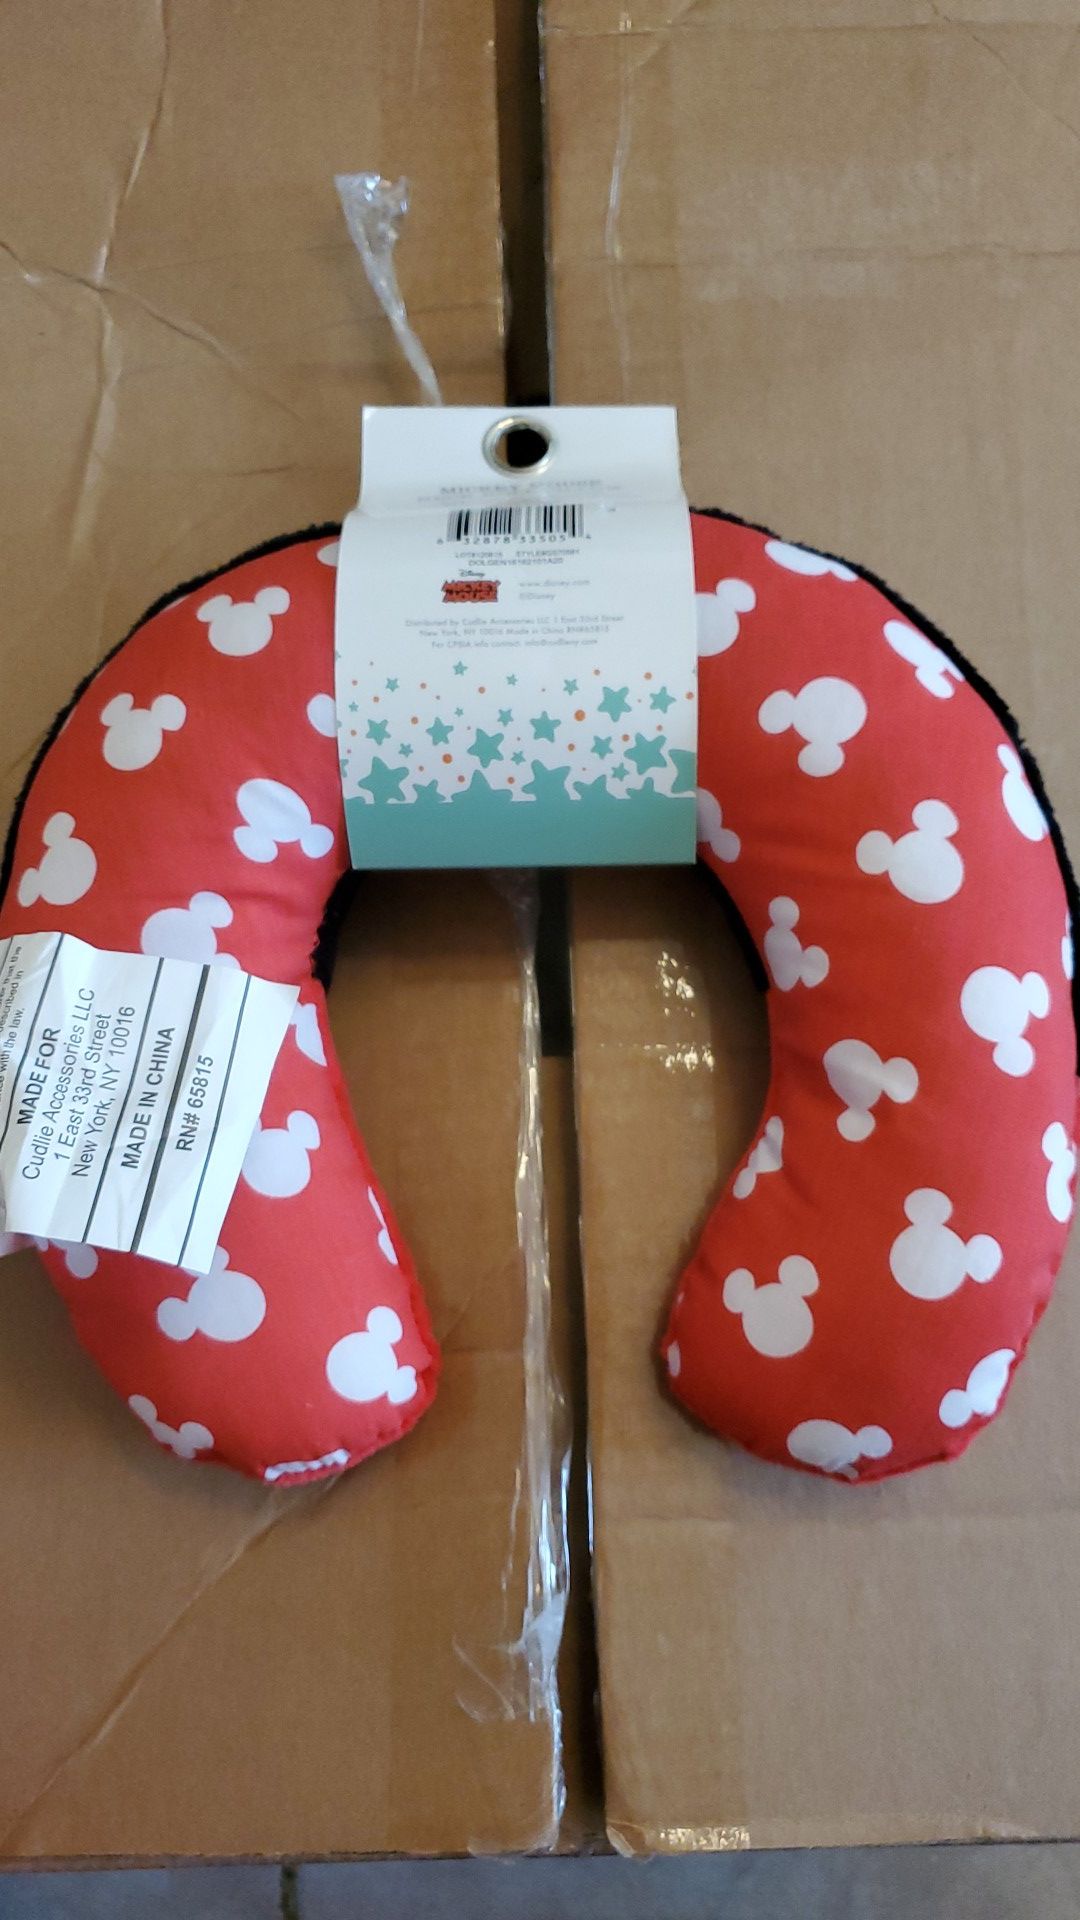 Disney Baby Mickey Mouse Neck Pillow